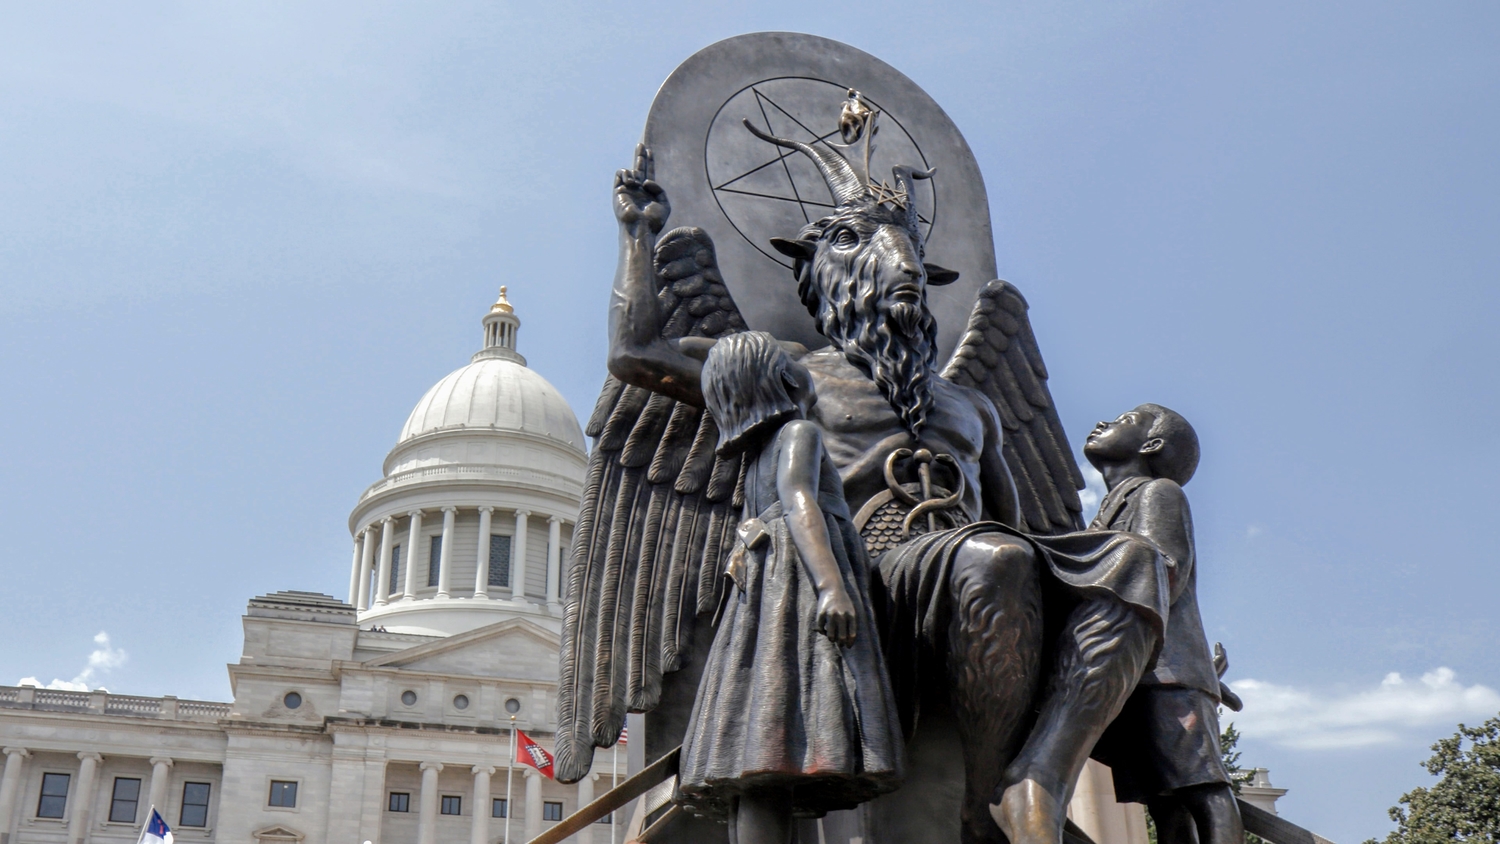 From Penny Lane's 'Hail Satan?" which opens April 17 through Magnolia Pictures. Courtesy of Magnolia Pictures